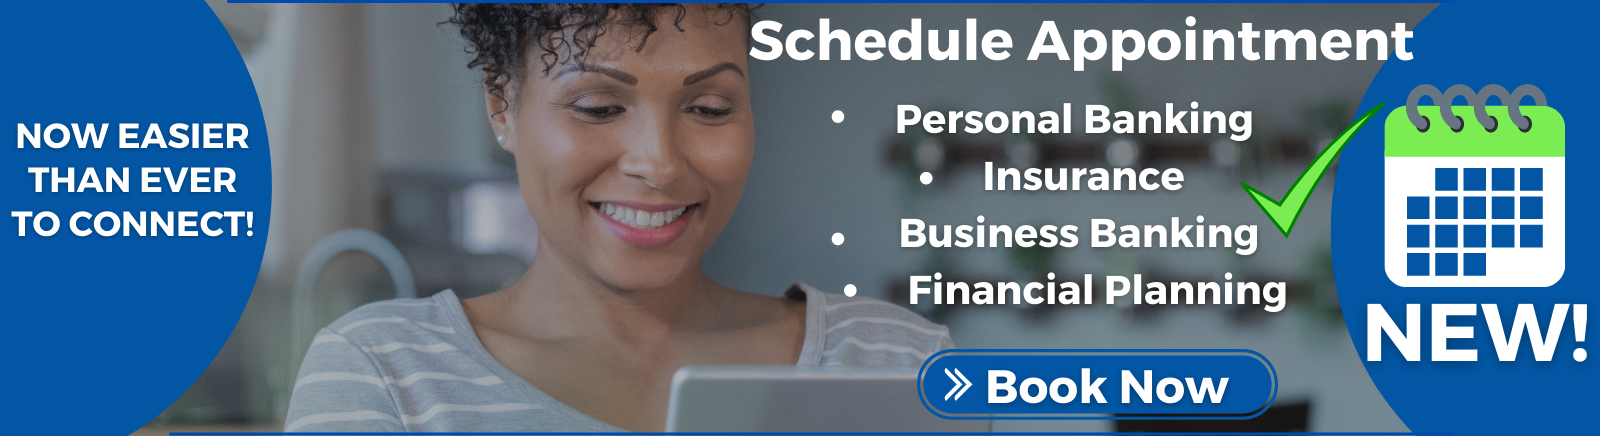 schedule appointment with seneca savings